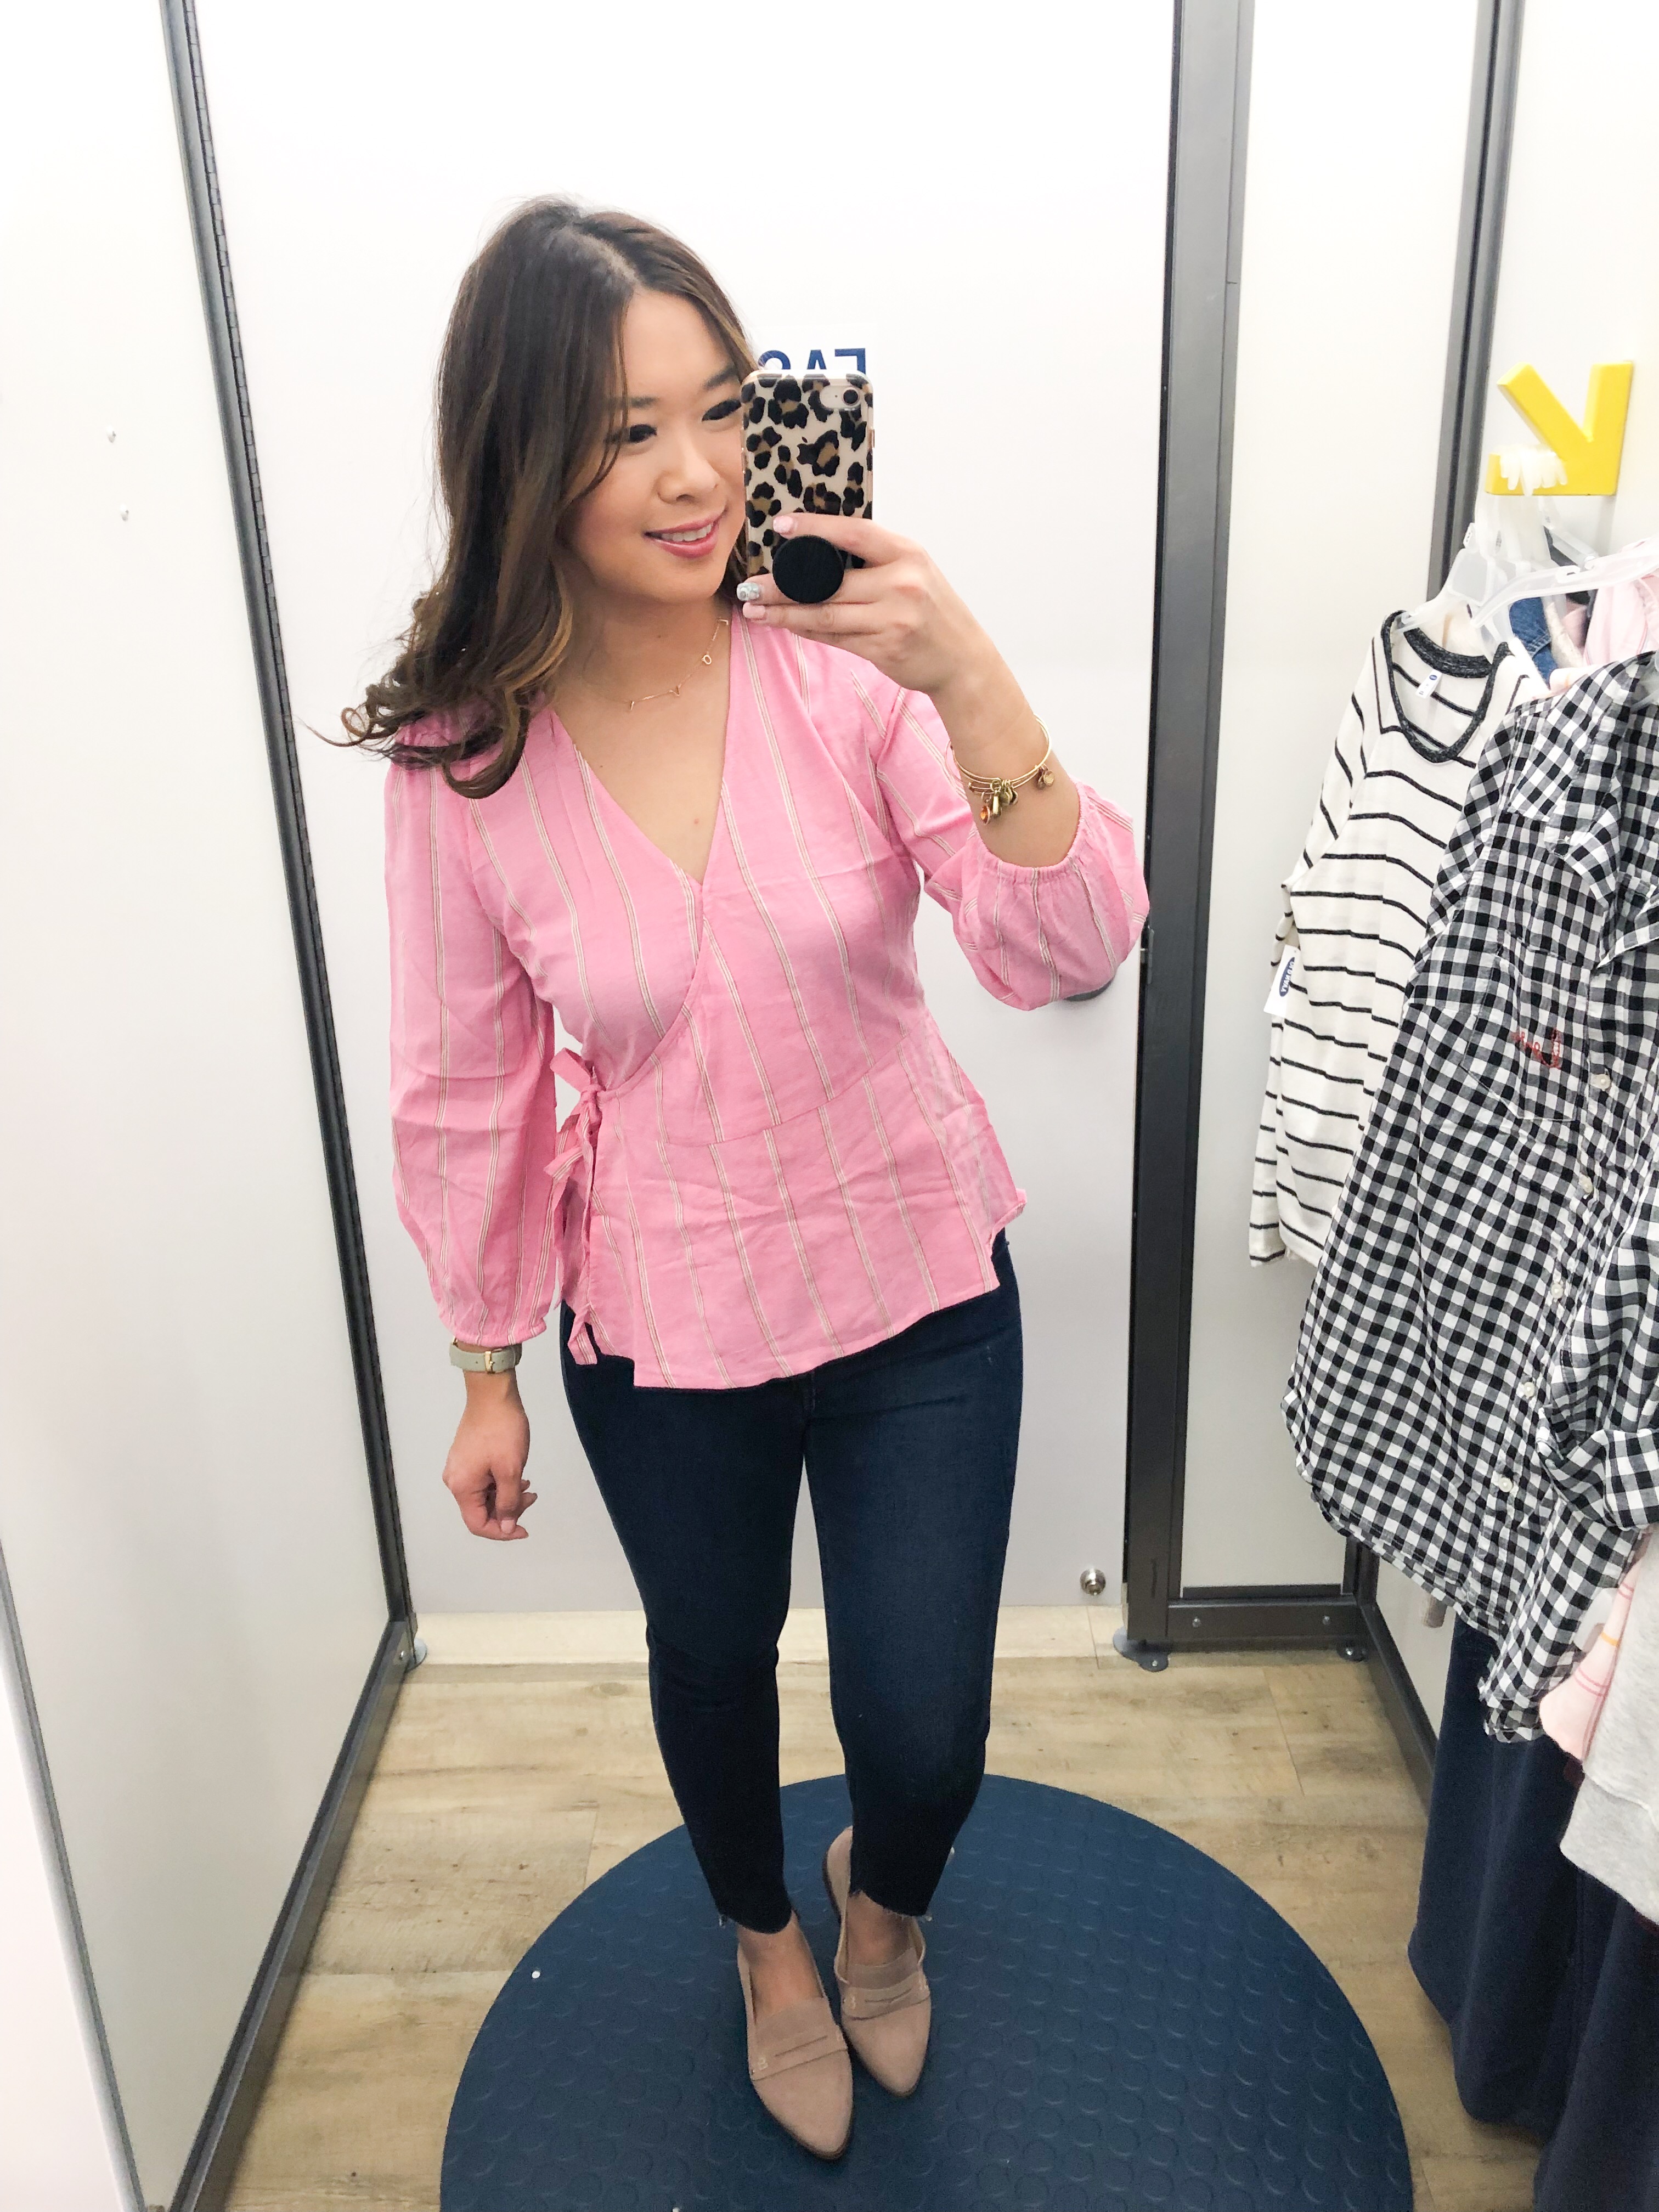 old navy outfits 2019